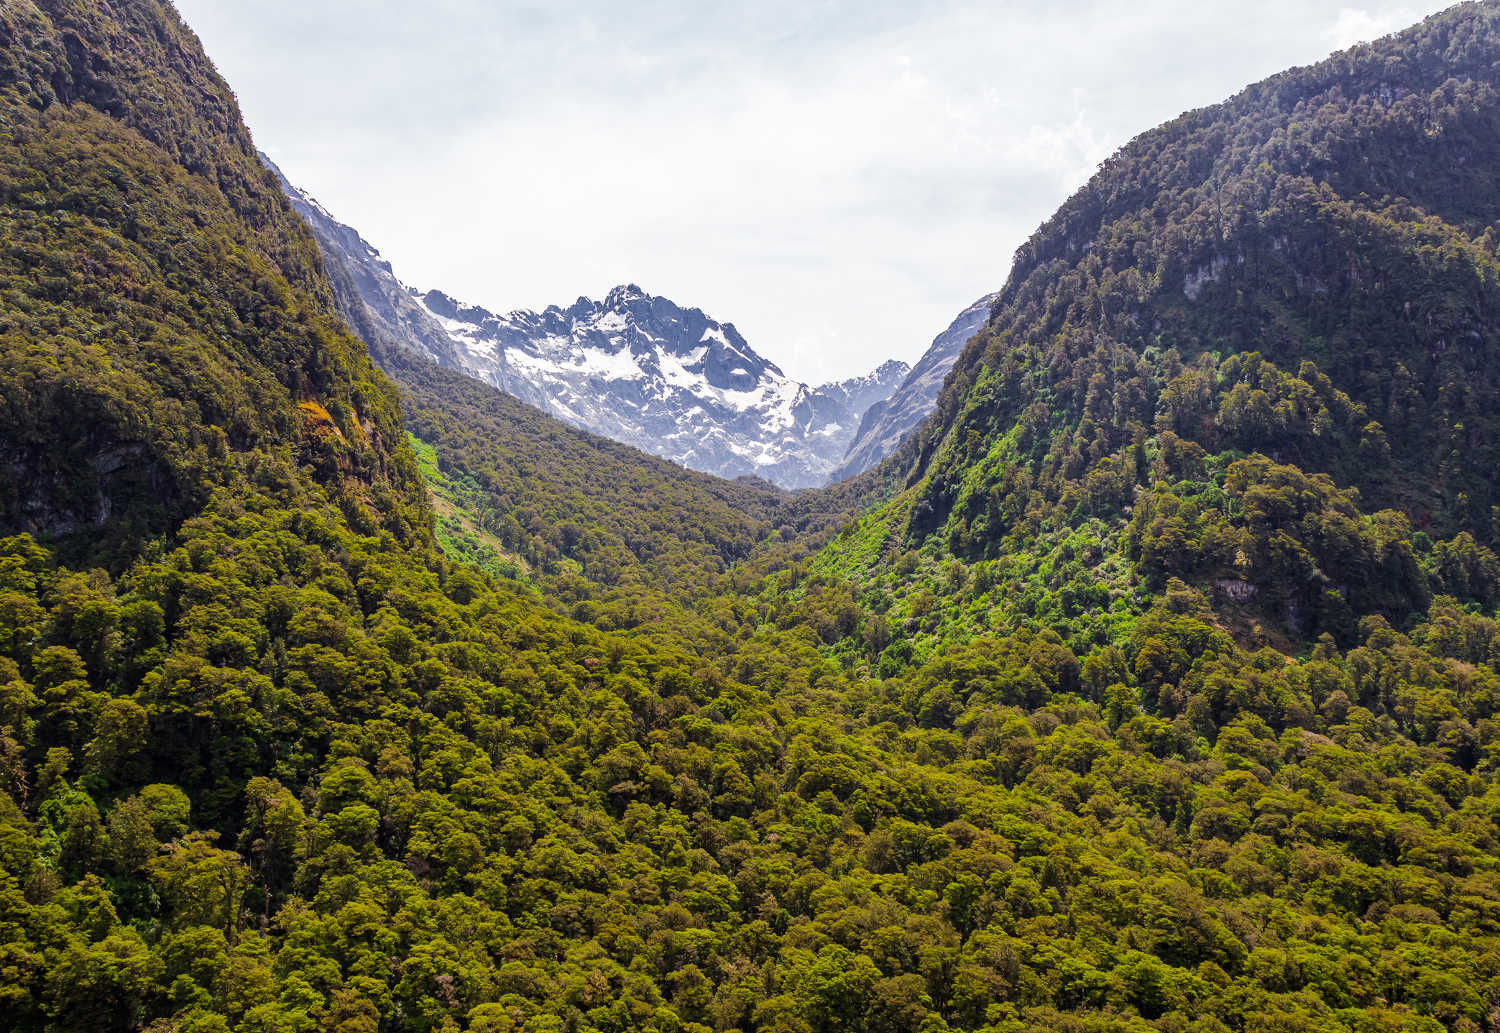 Pop`s view lookout. Landscapes of Fiordland National Park, South Island, New Zealand